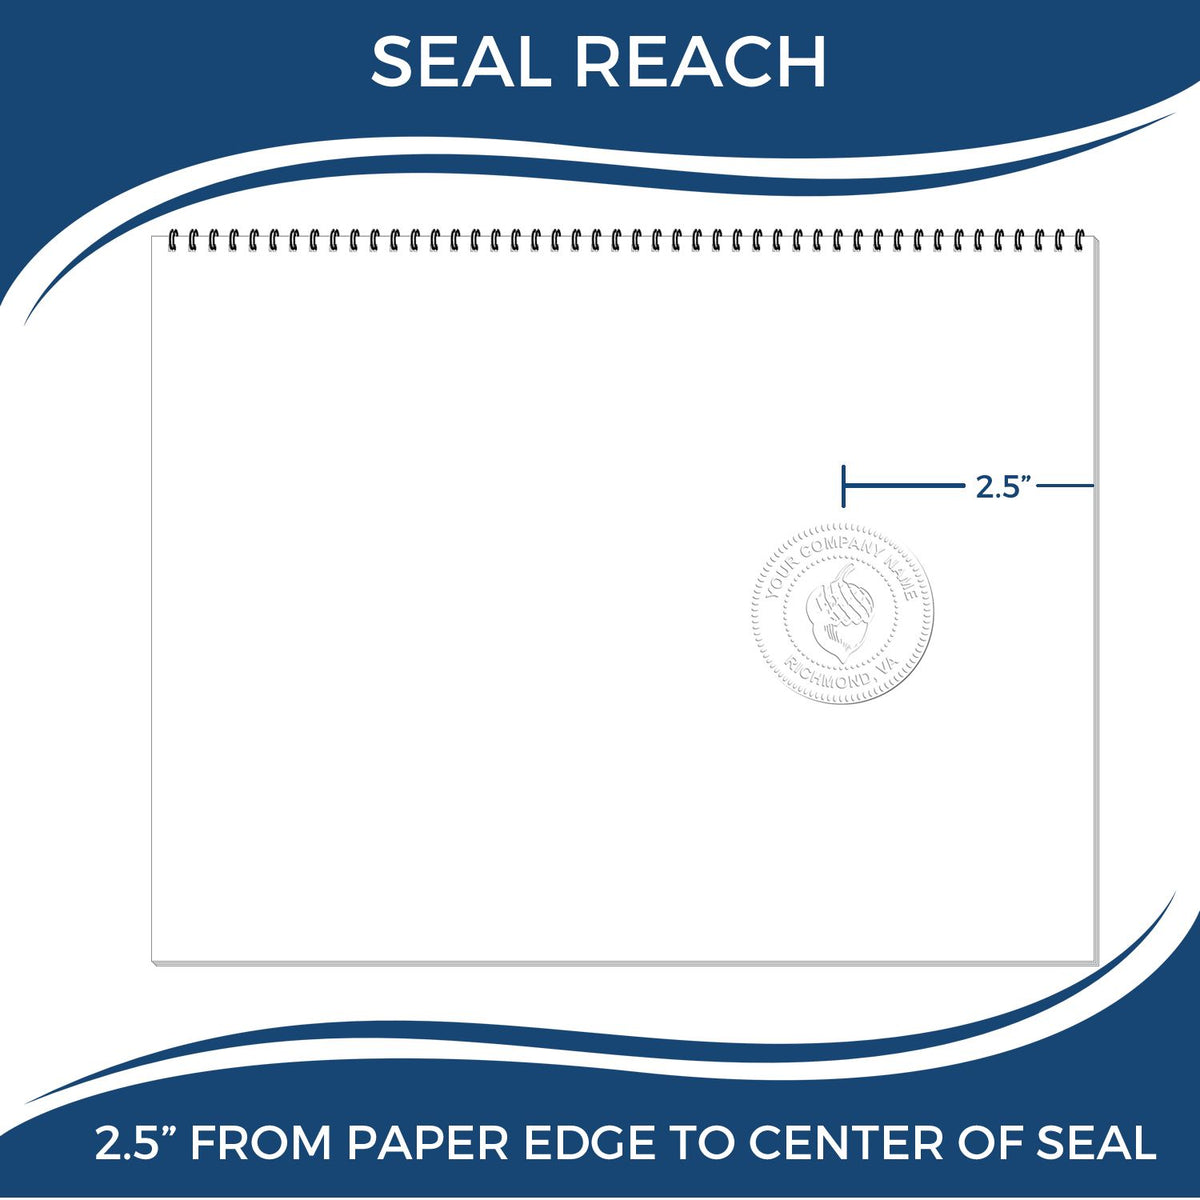 An infographic showing the seal reach which is represented by a ruler and a miniature seal image of the Long Reach North Dakota Geology Seal